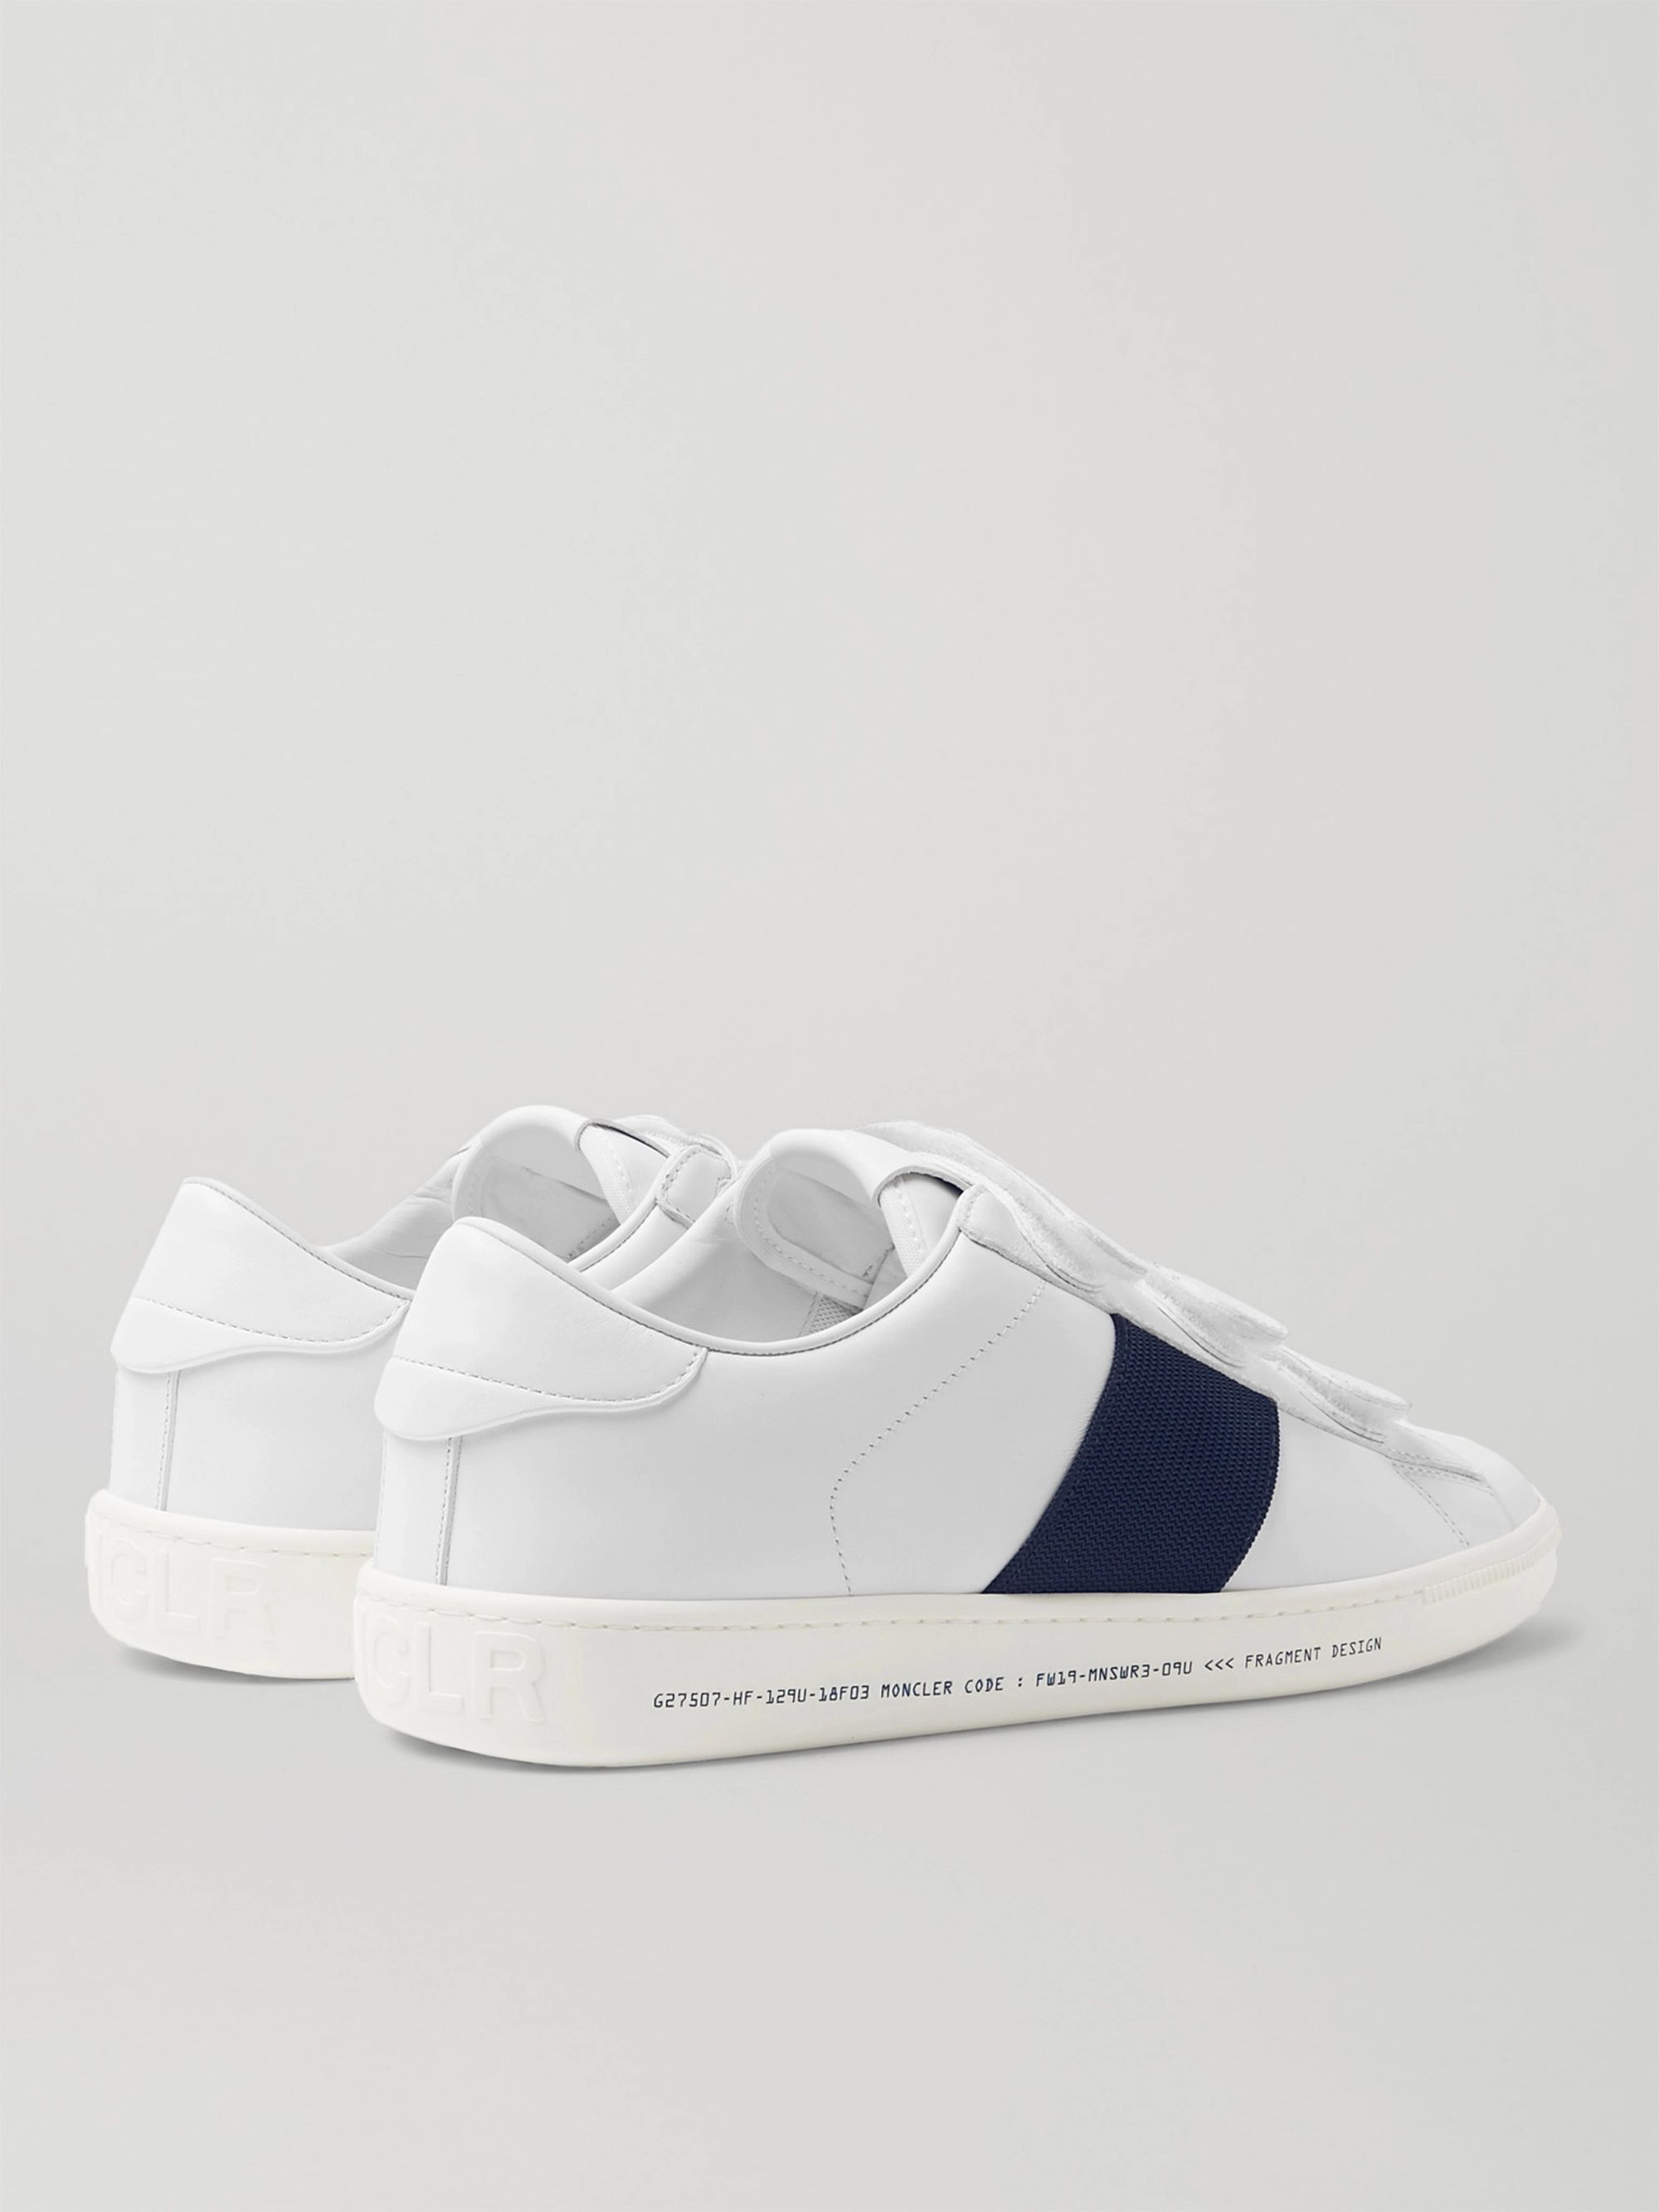 White 7 Moncler Fragment Webbing-Trimmed Leather Sneakers | MONCLER ...